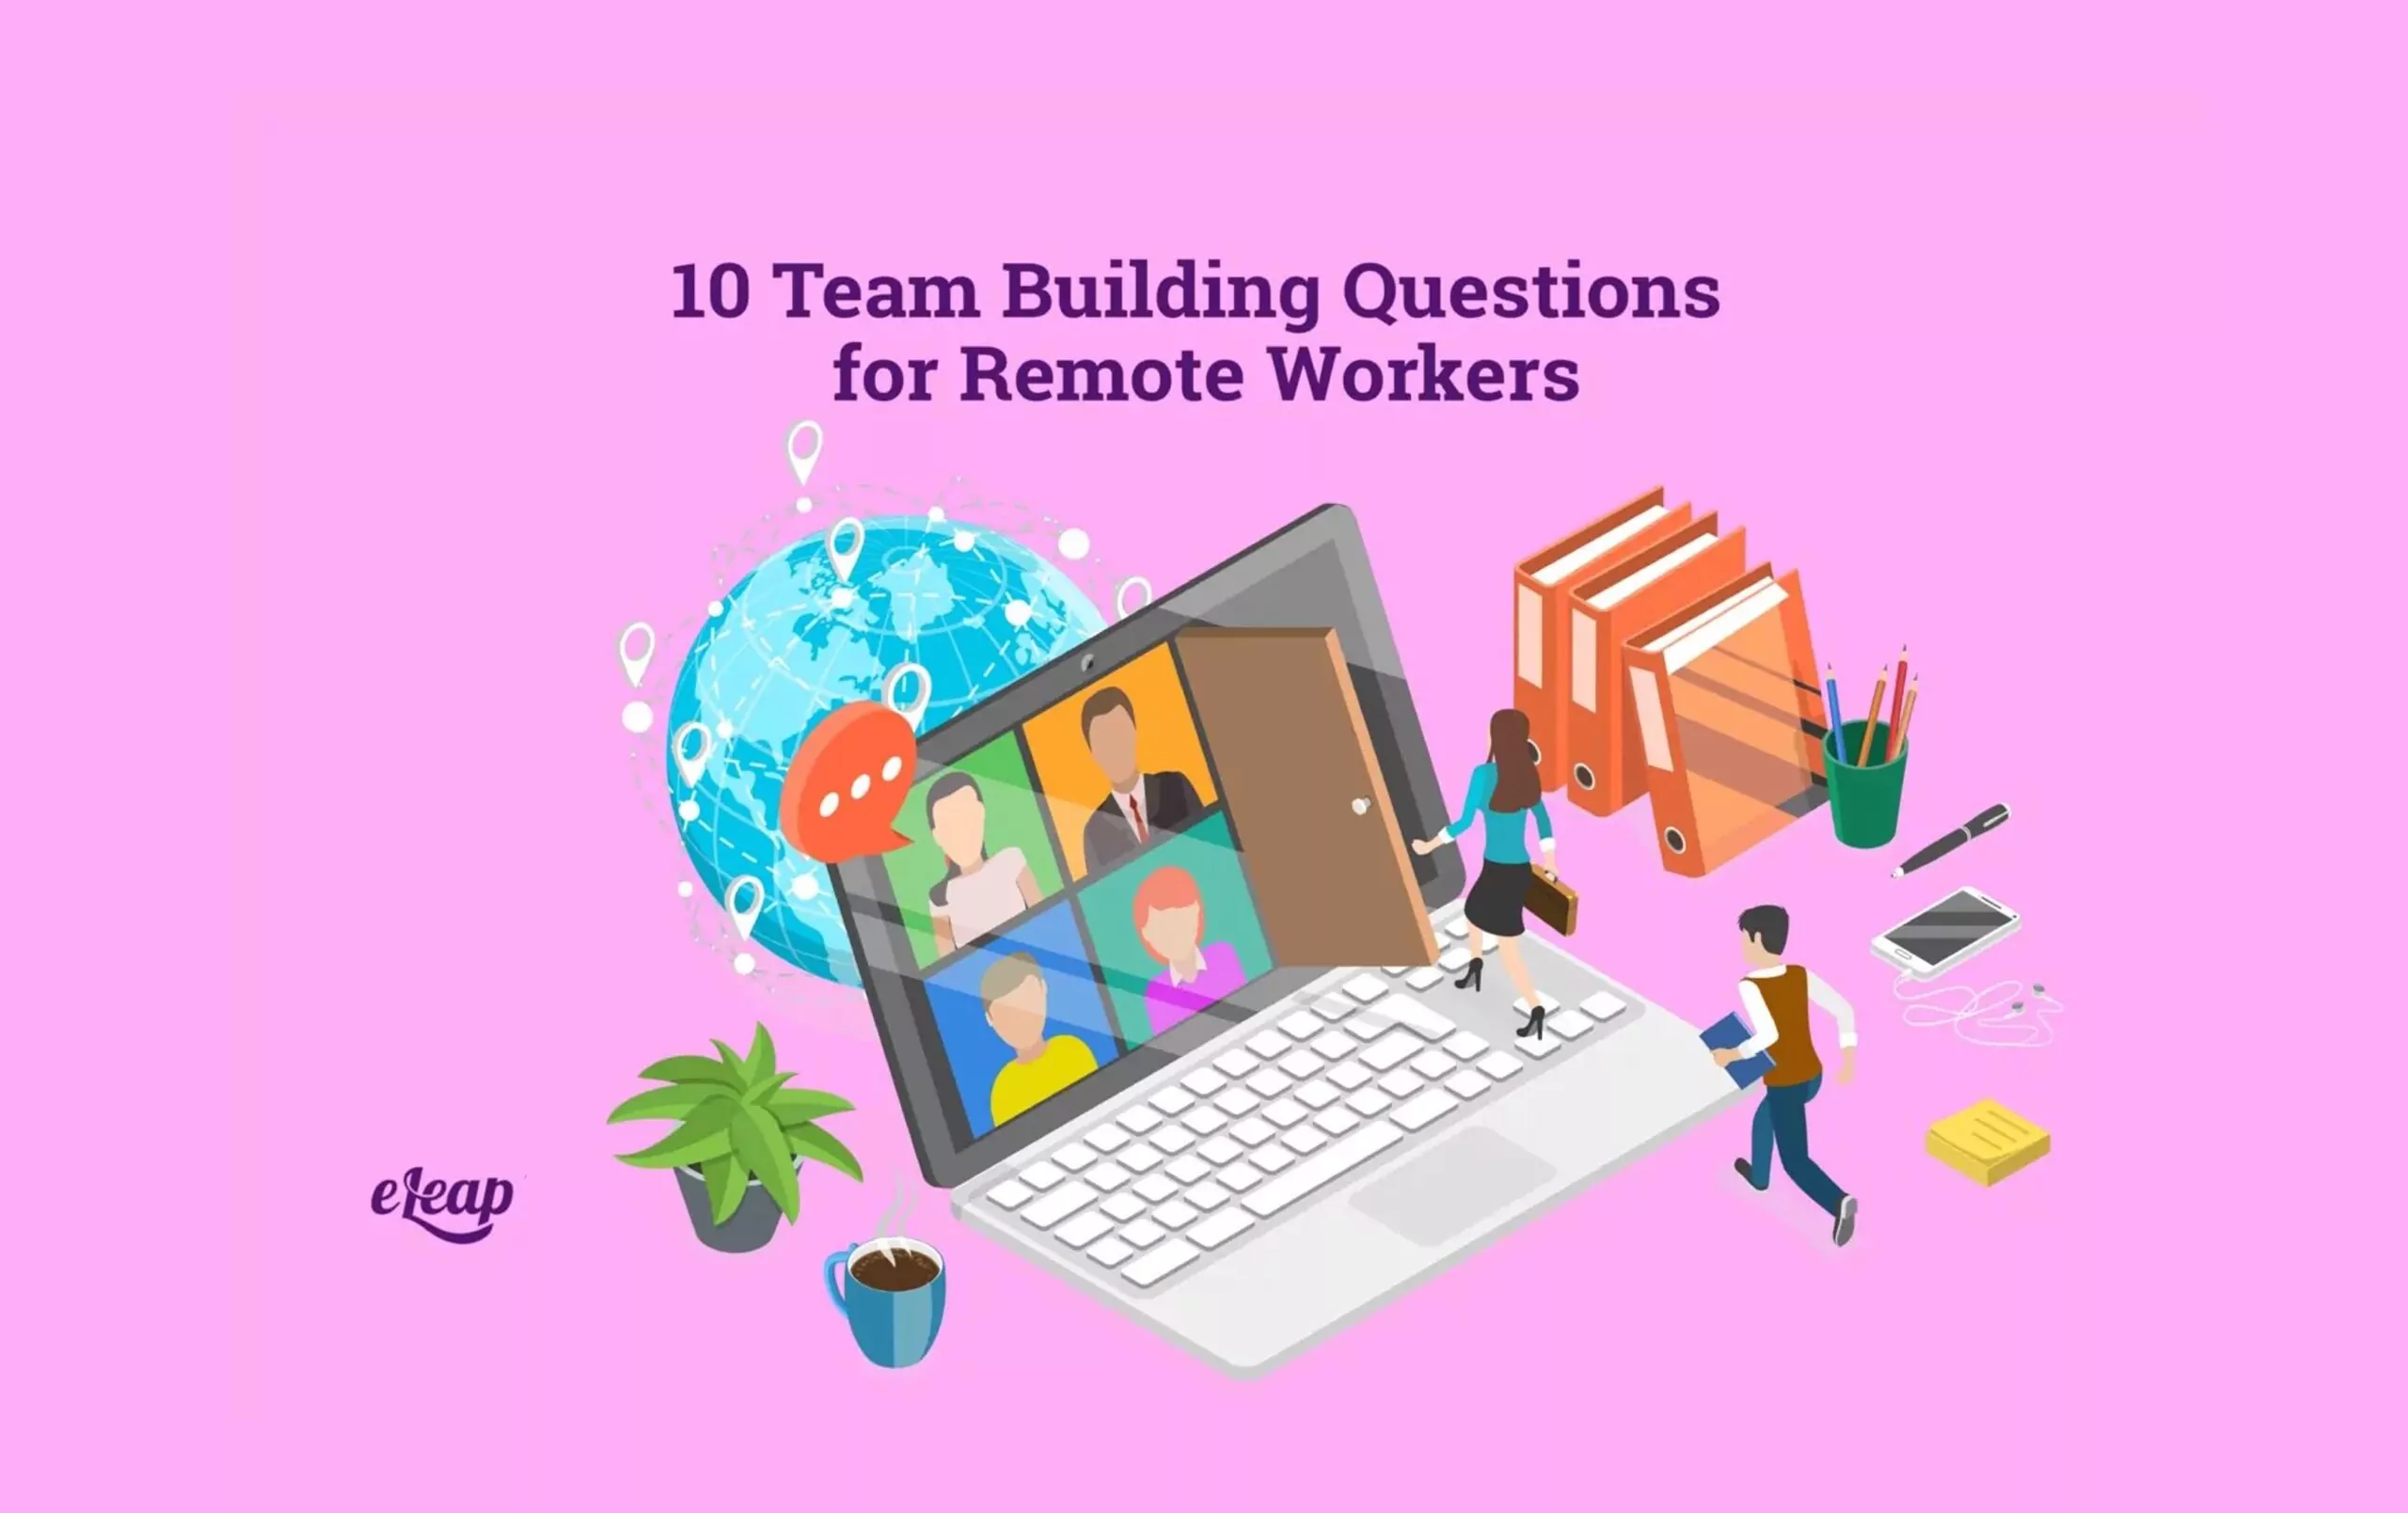 Team Building Questions for Remote Workers